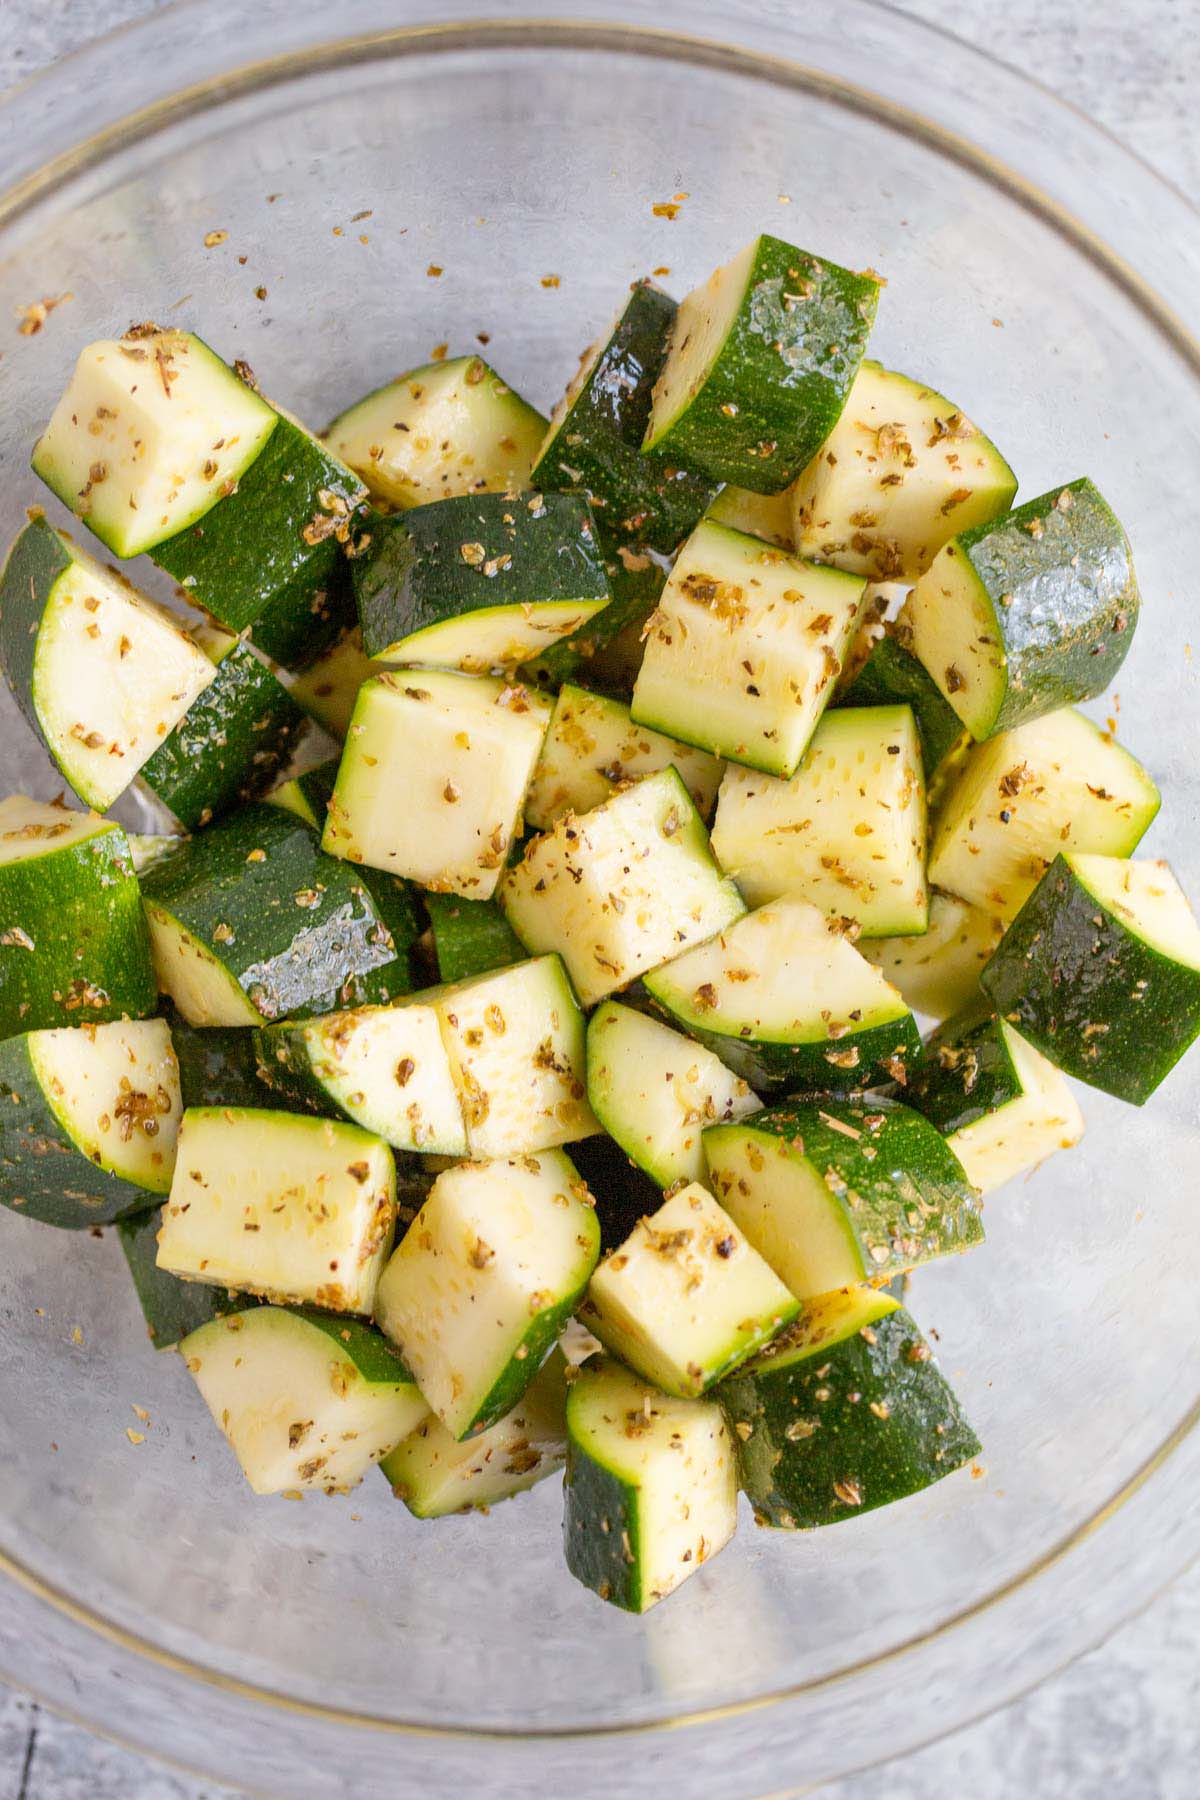 Zucchini mixed with herbs and lemon.